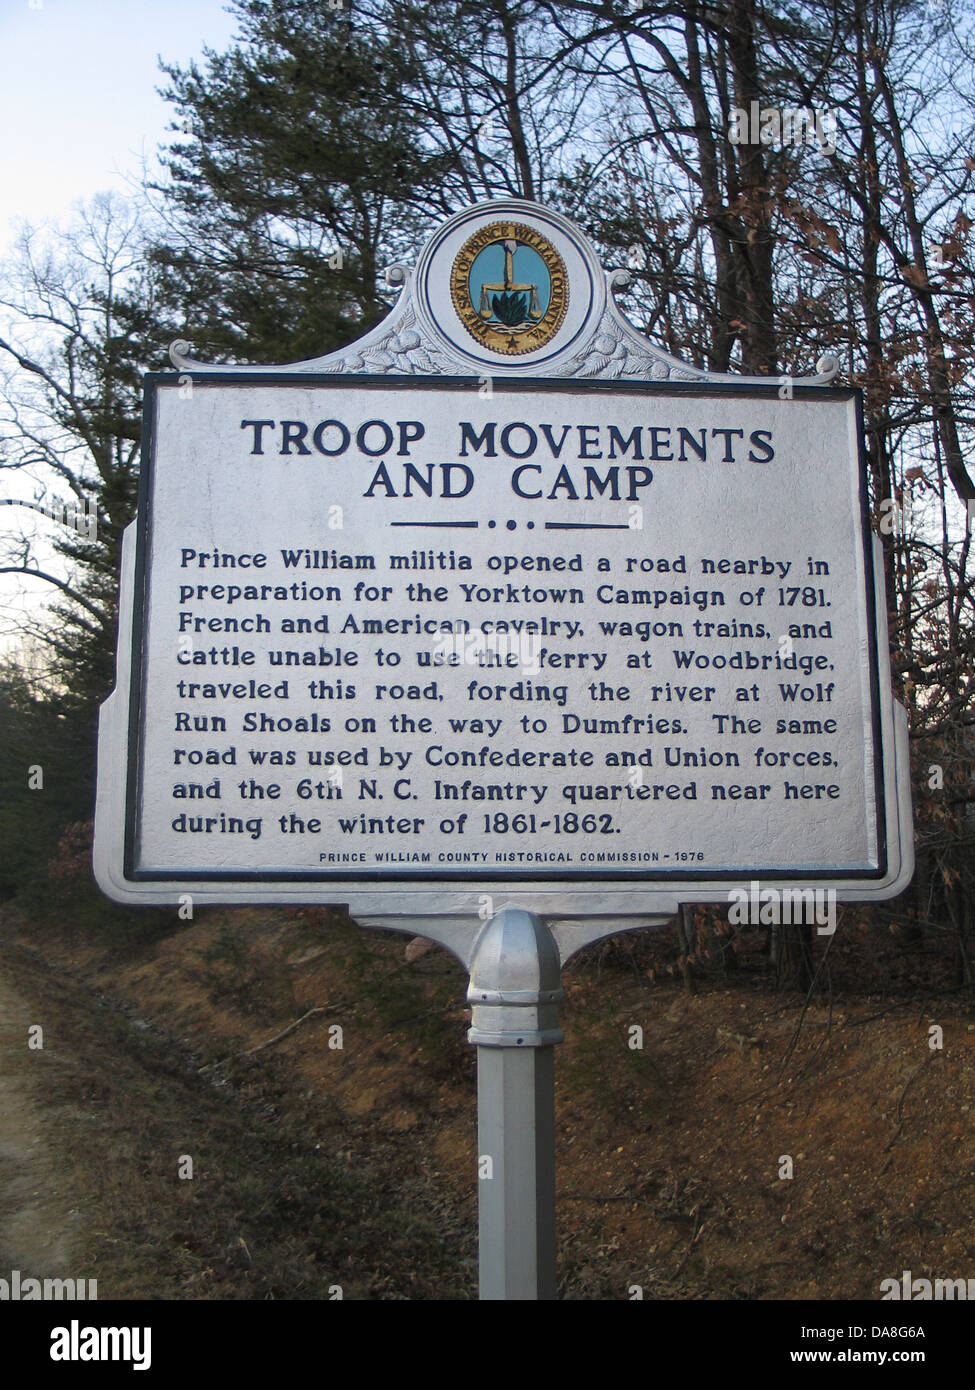 TROOP MOVEMENTS AND CAMP Prince William militia opened a road nearby in preparation for the Yorktown Campaign of 1781. French and American calvary [sic], wagon trains, and cattle unable to use the ferry at Woodbridge, traveled this road, fording the river at Wolf Run Shoals, on the way to Dumfries. The same road was used by Confederate and Union forces, and the 6th N.C. Infantry quartered near here during the winter of 1861-1862. Prince William County Historical Commission, 1976 Stock Photo